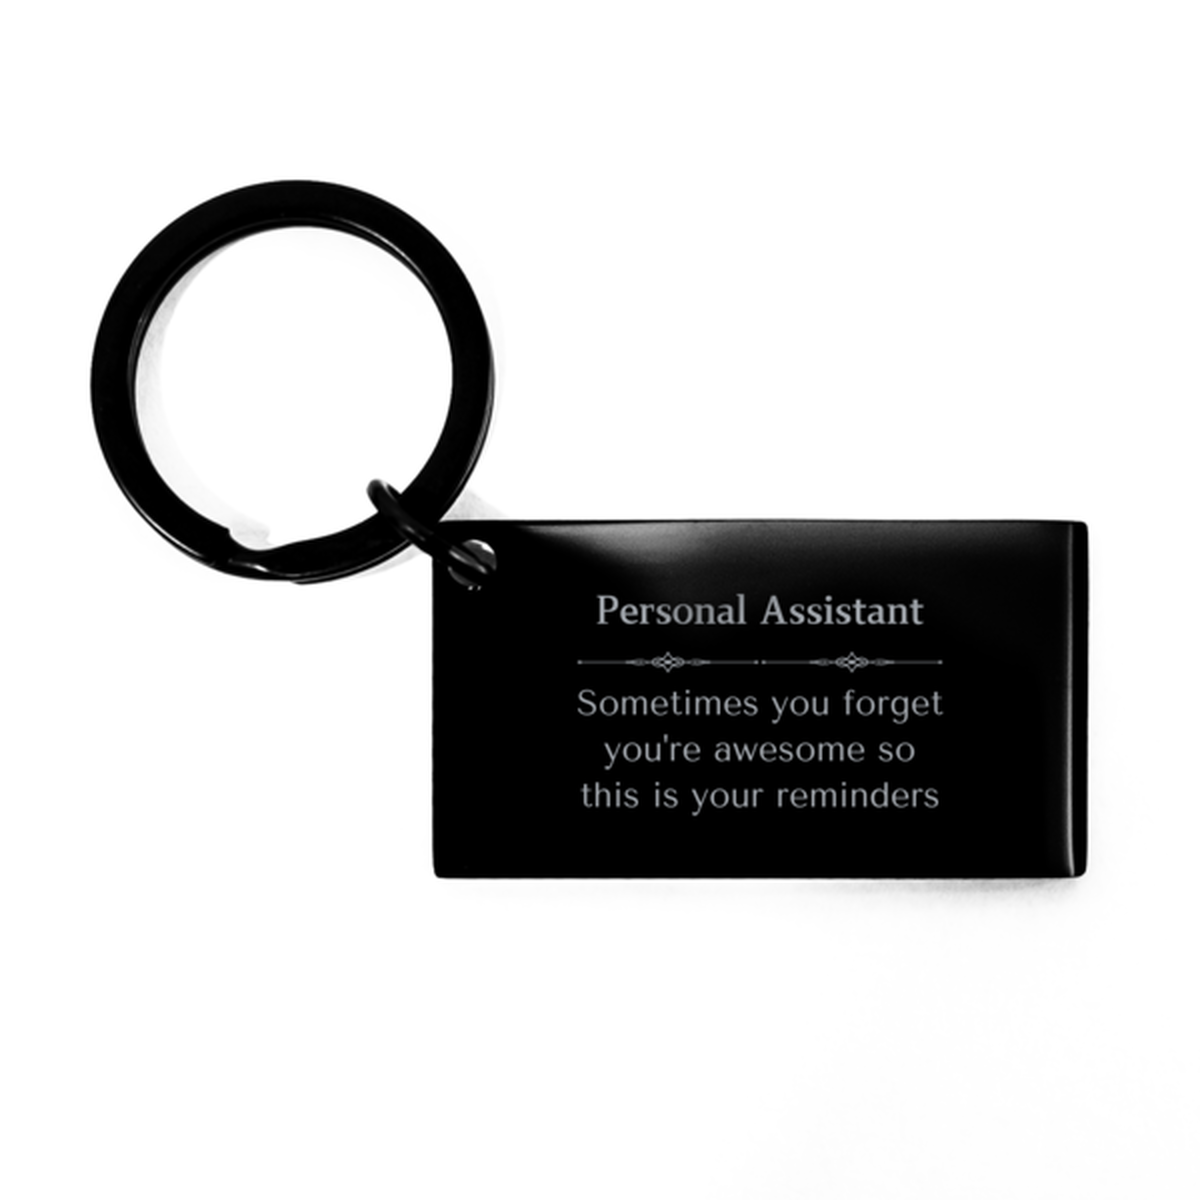 Sentimental Personal Assistant Keychain, Receptionist Sometimes you forget you're awesome so this is your reminders, Graduation Christmas Birthday Gifts for Personal Assistant, Men, Women, Coworkers